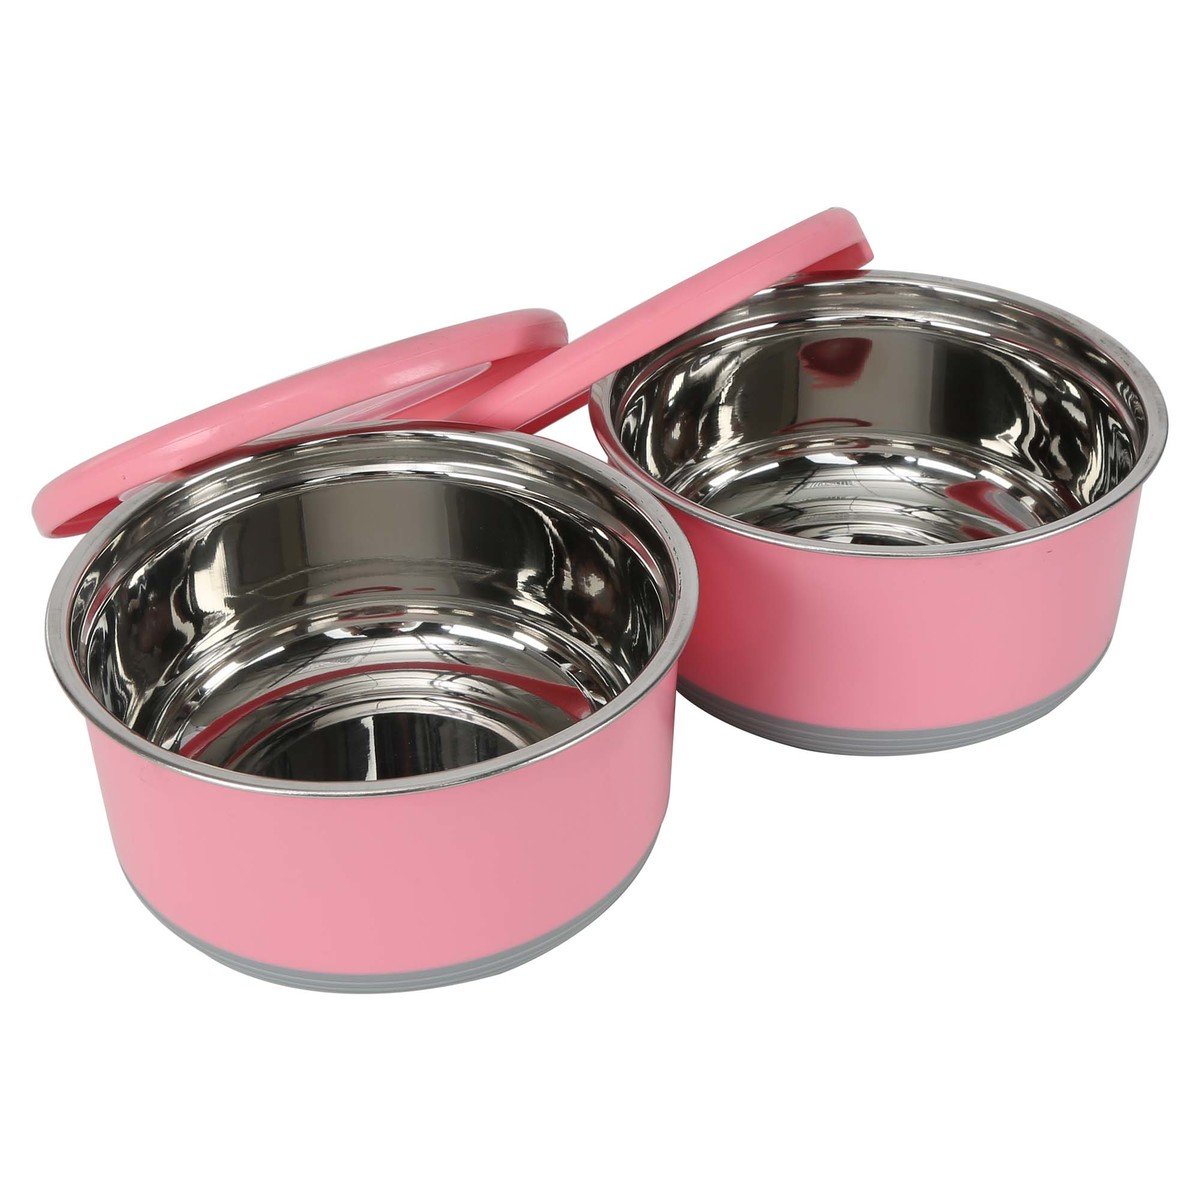 Joyo Stainless Steel Food Container 725ml 2pcs Assorted Colors